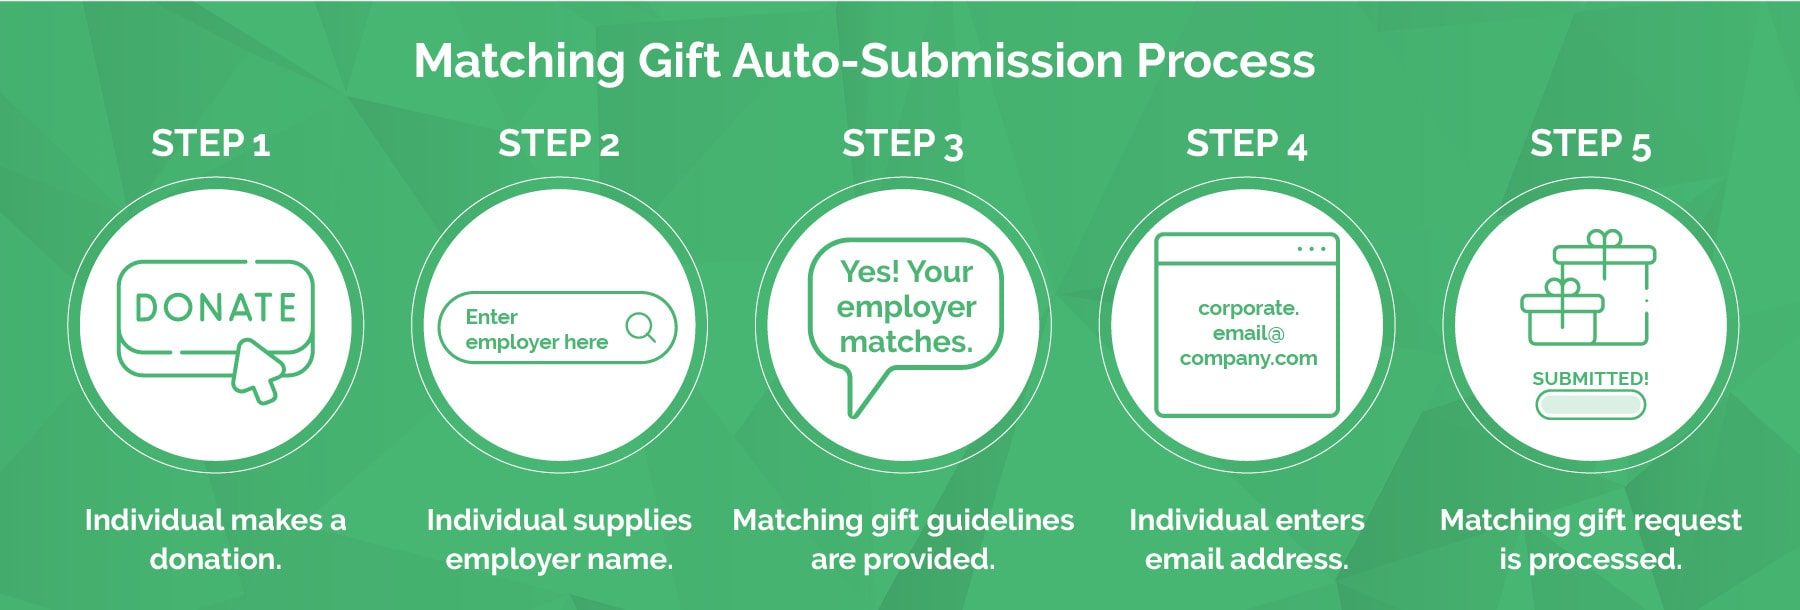 This image shows how the matching gift auto-submission process works.